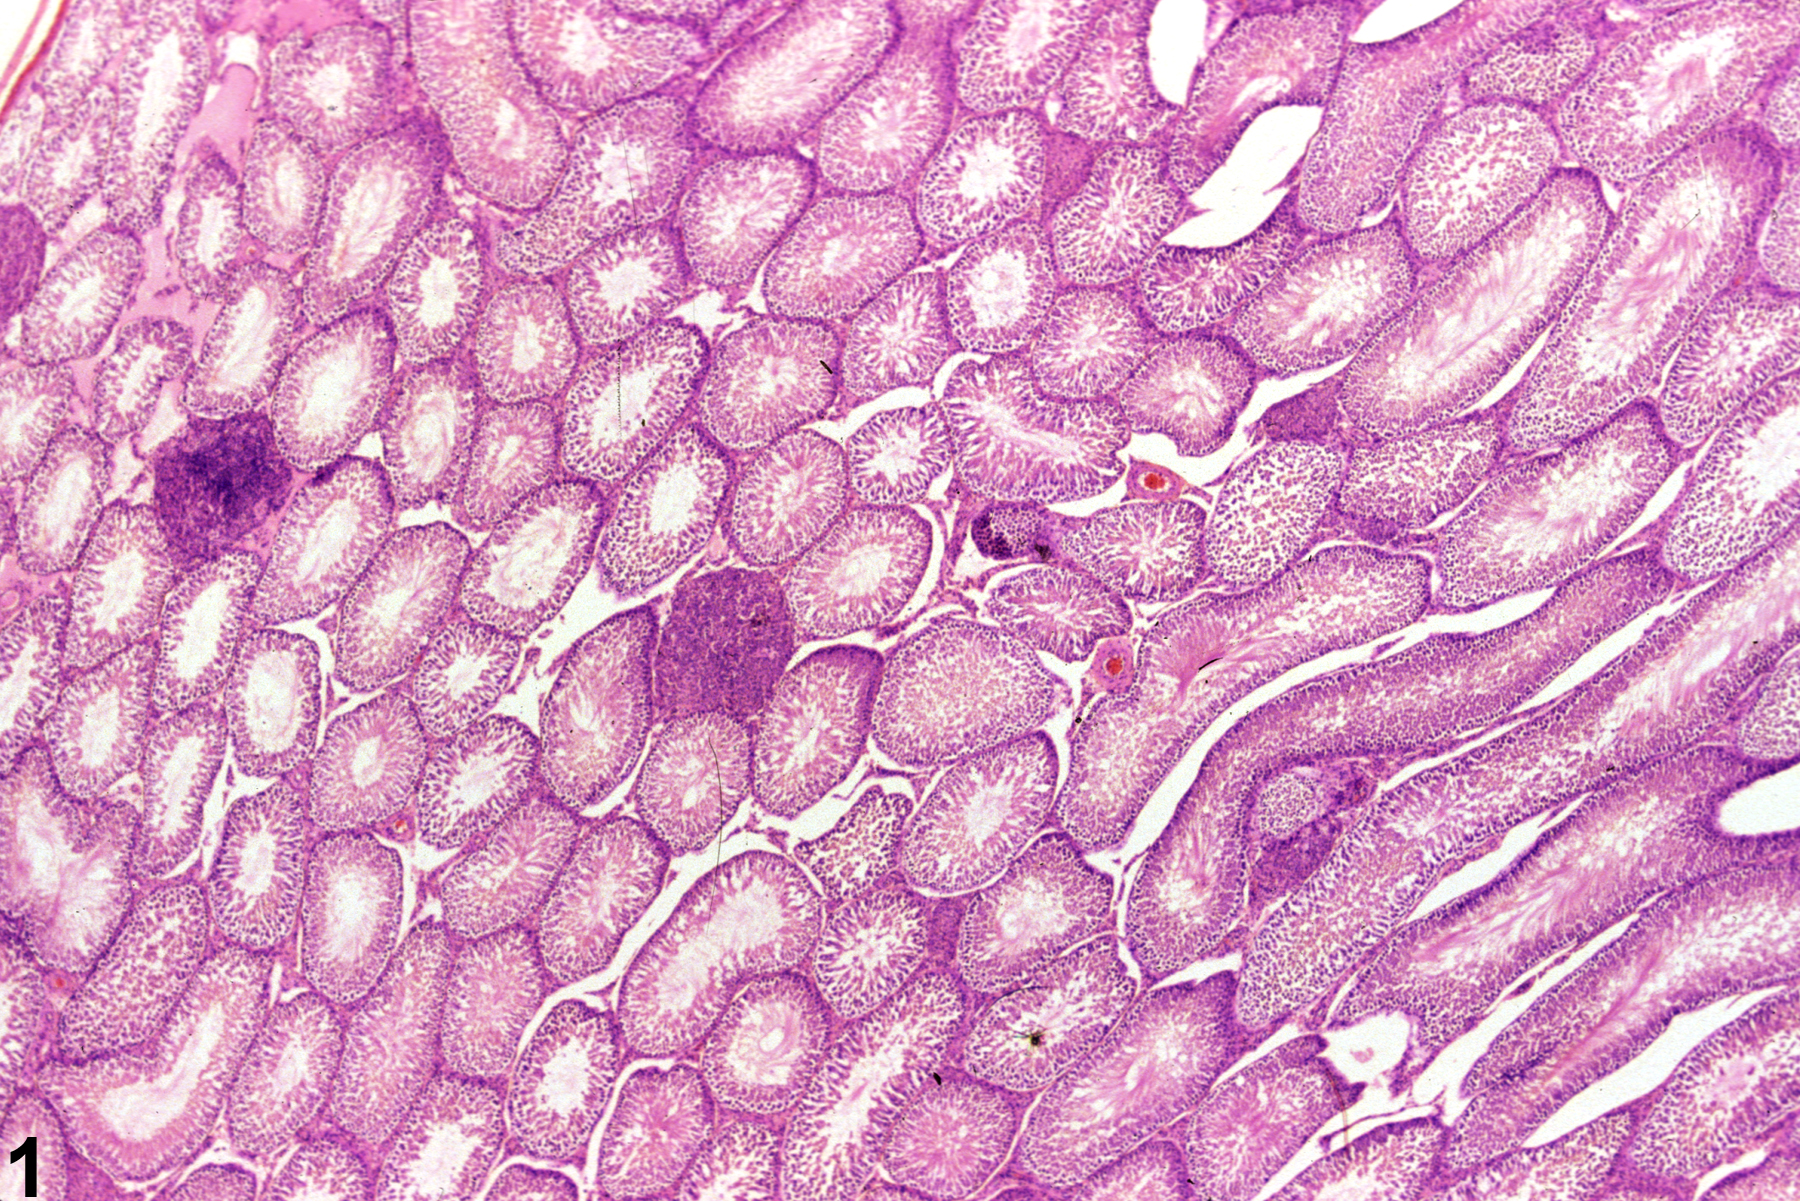 Image of interstitial cell hyperplasia in the testis from a male F344/N rat in a chronic study